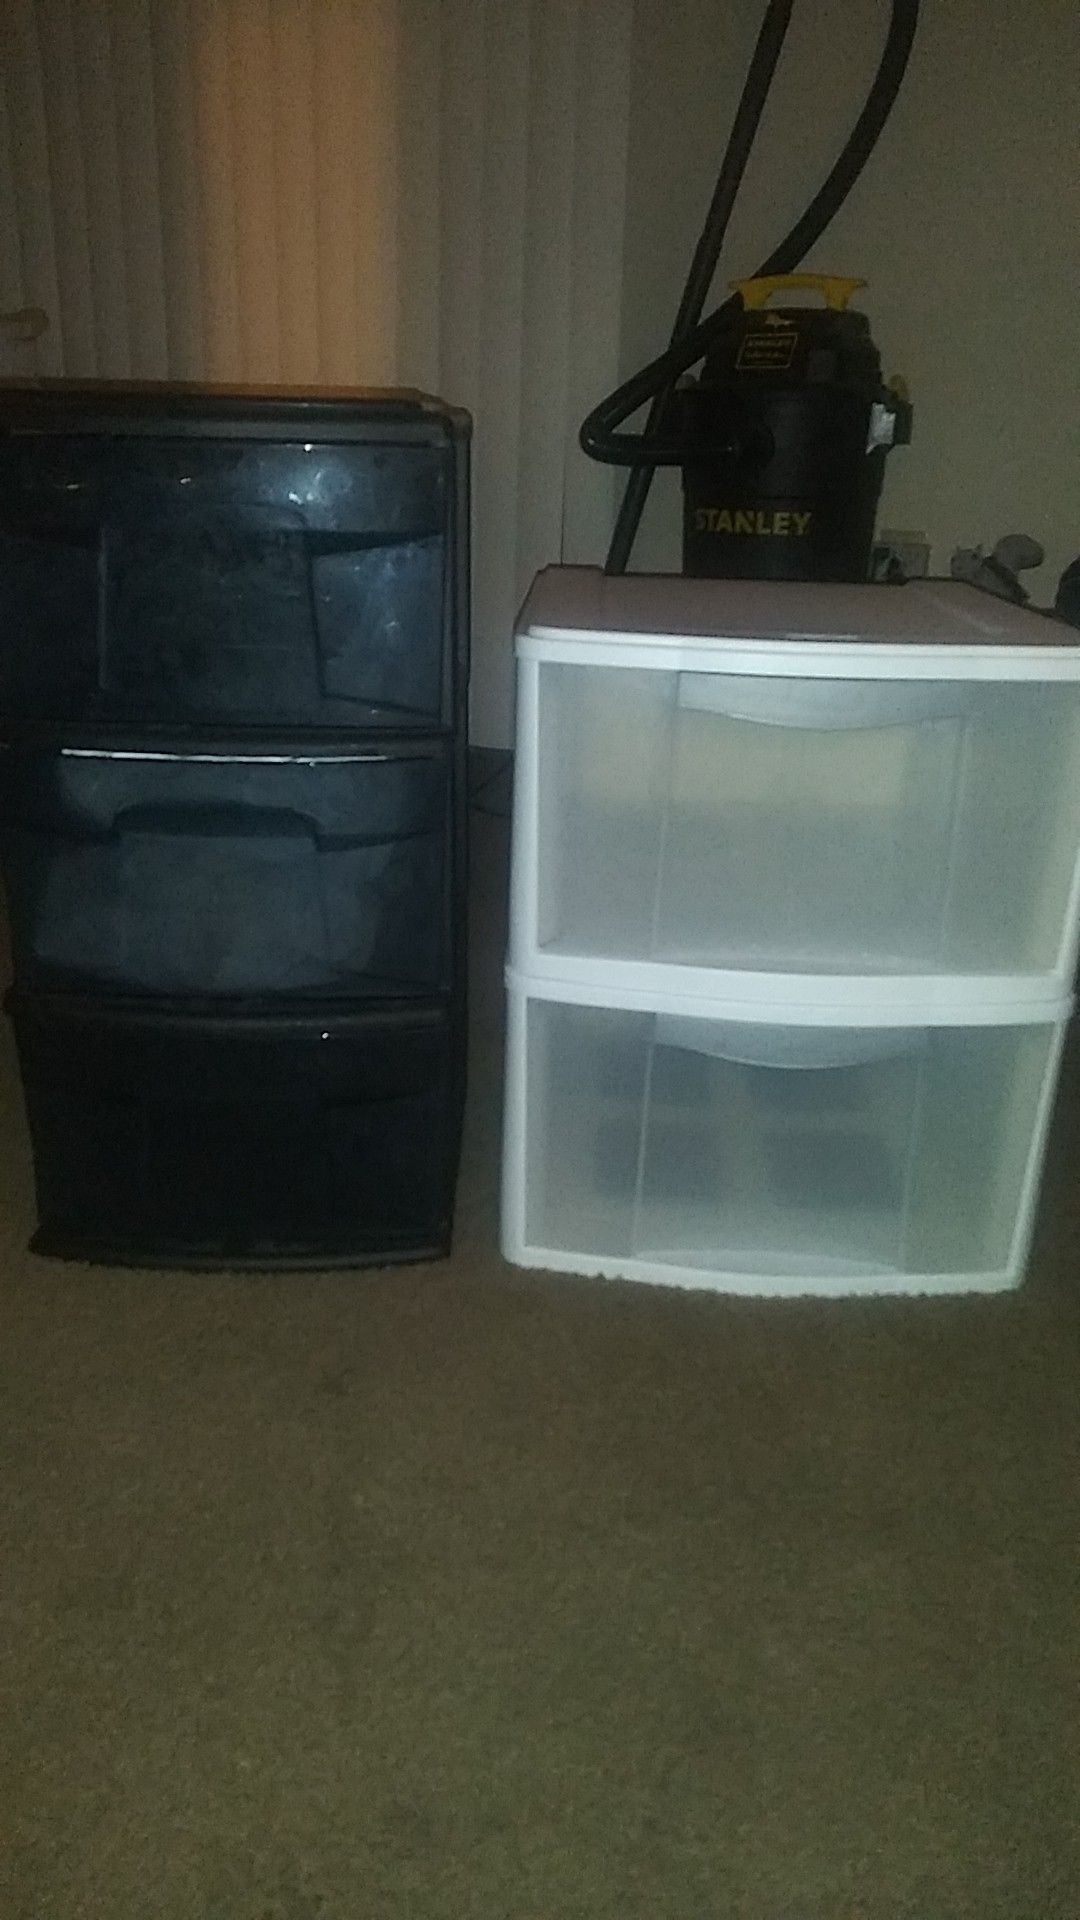 Sterilite storage containers with drawers